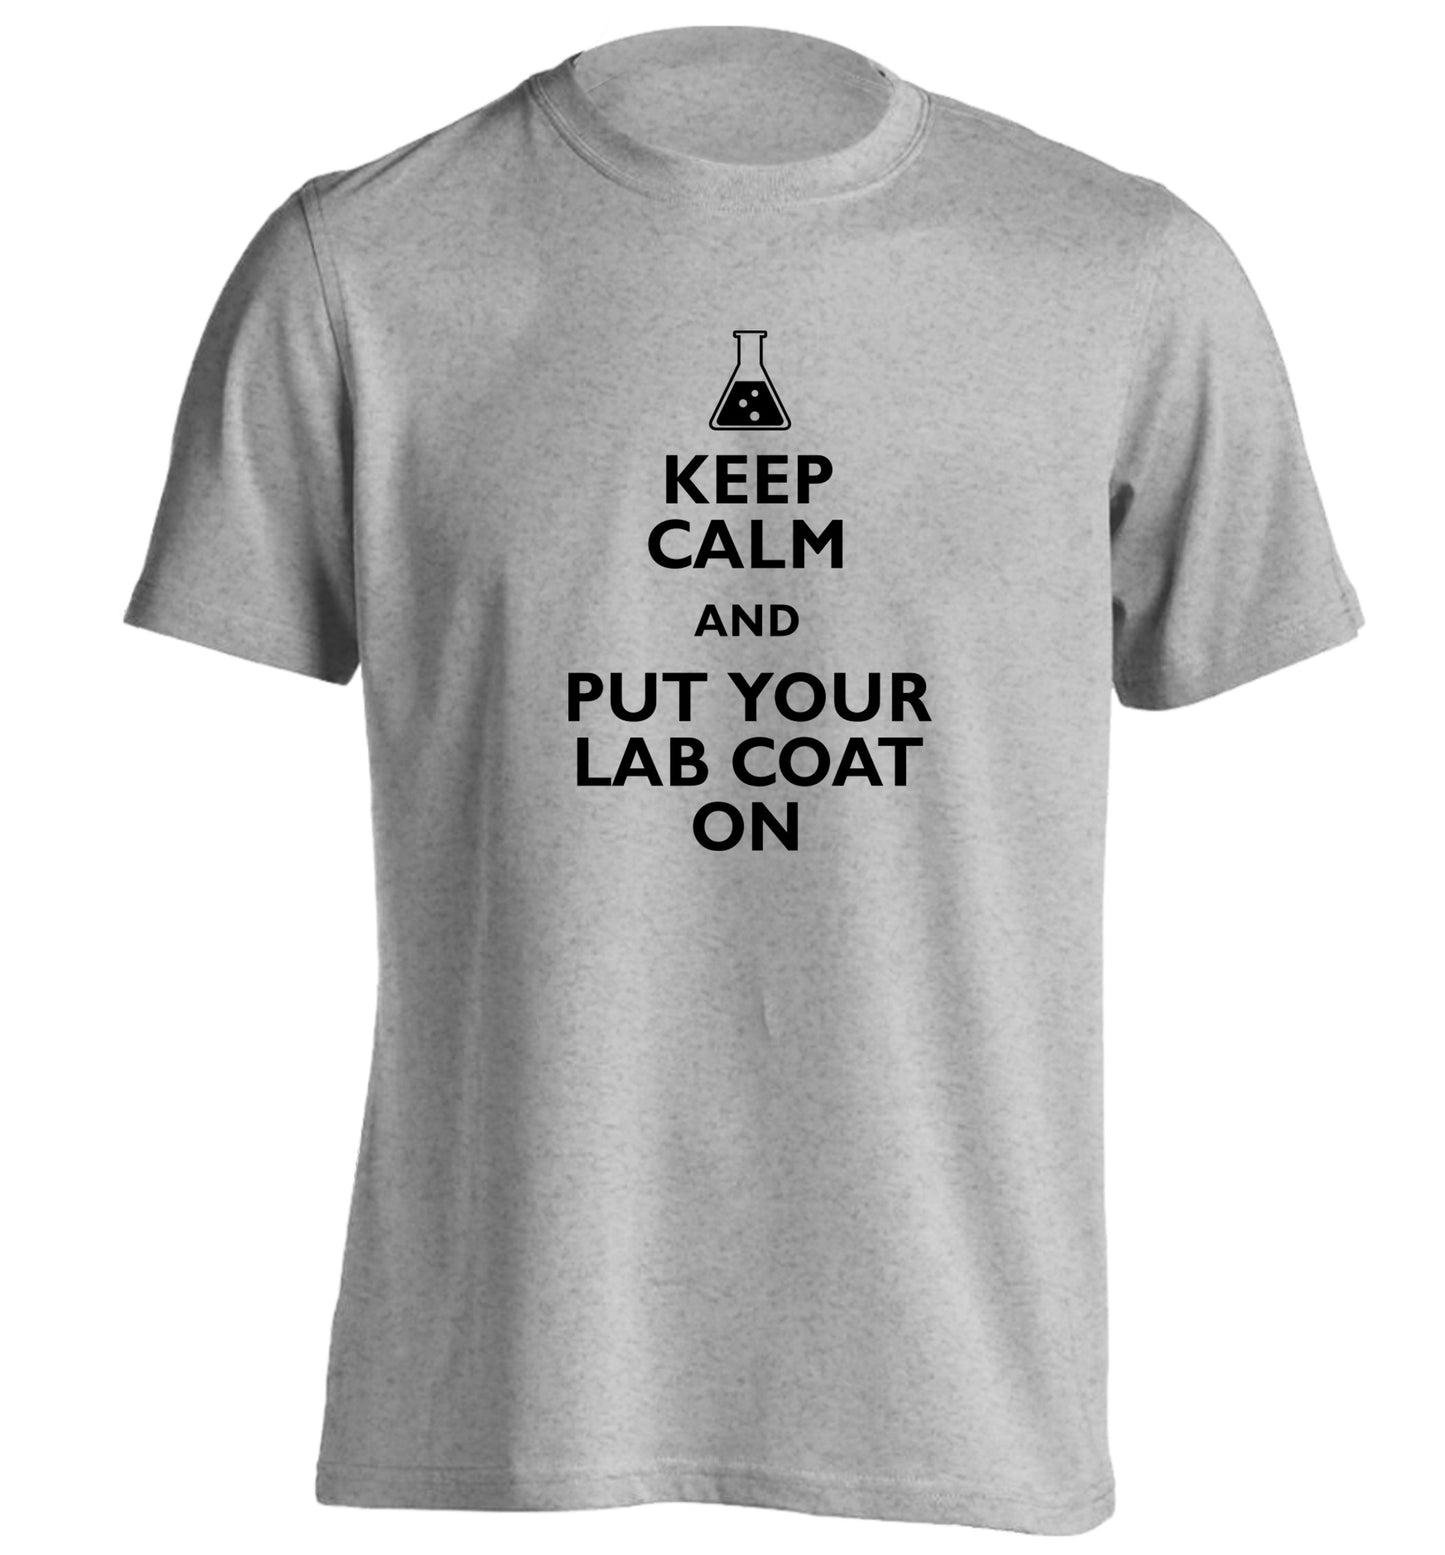 Keep calm and put your lab coat on adults unisex grey Tshirt 2XL